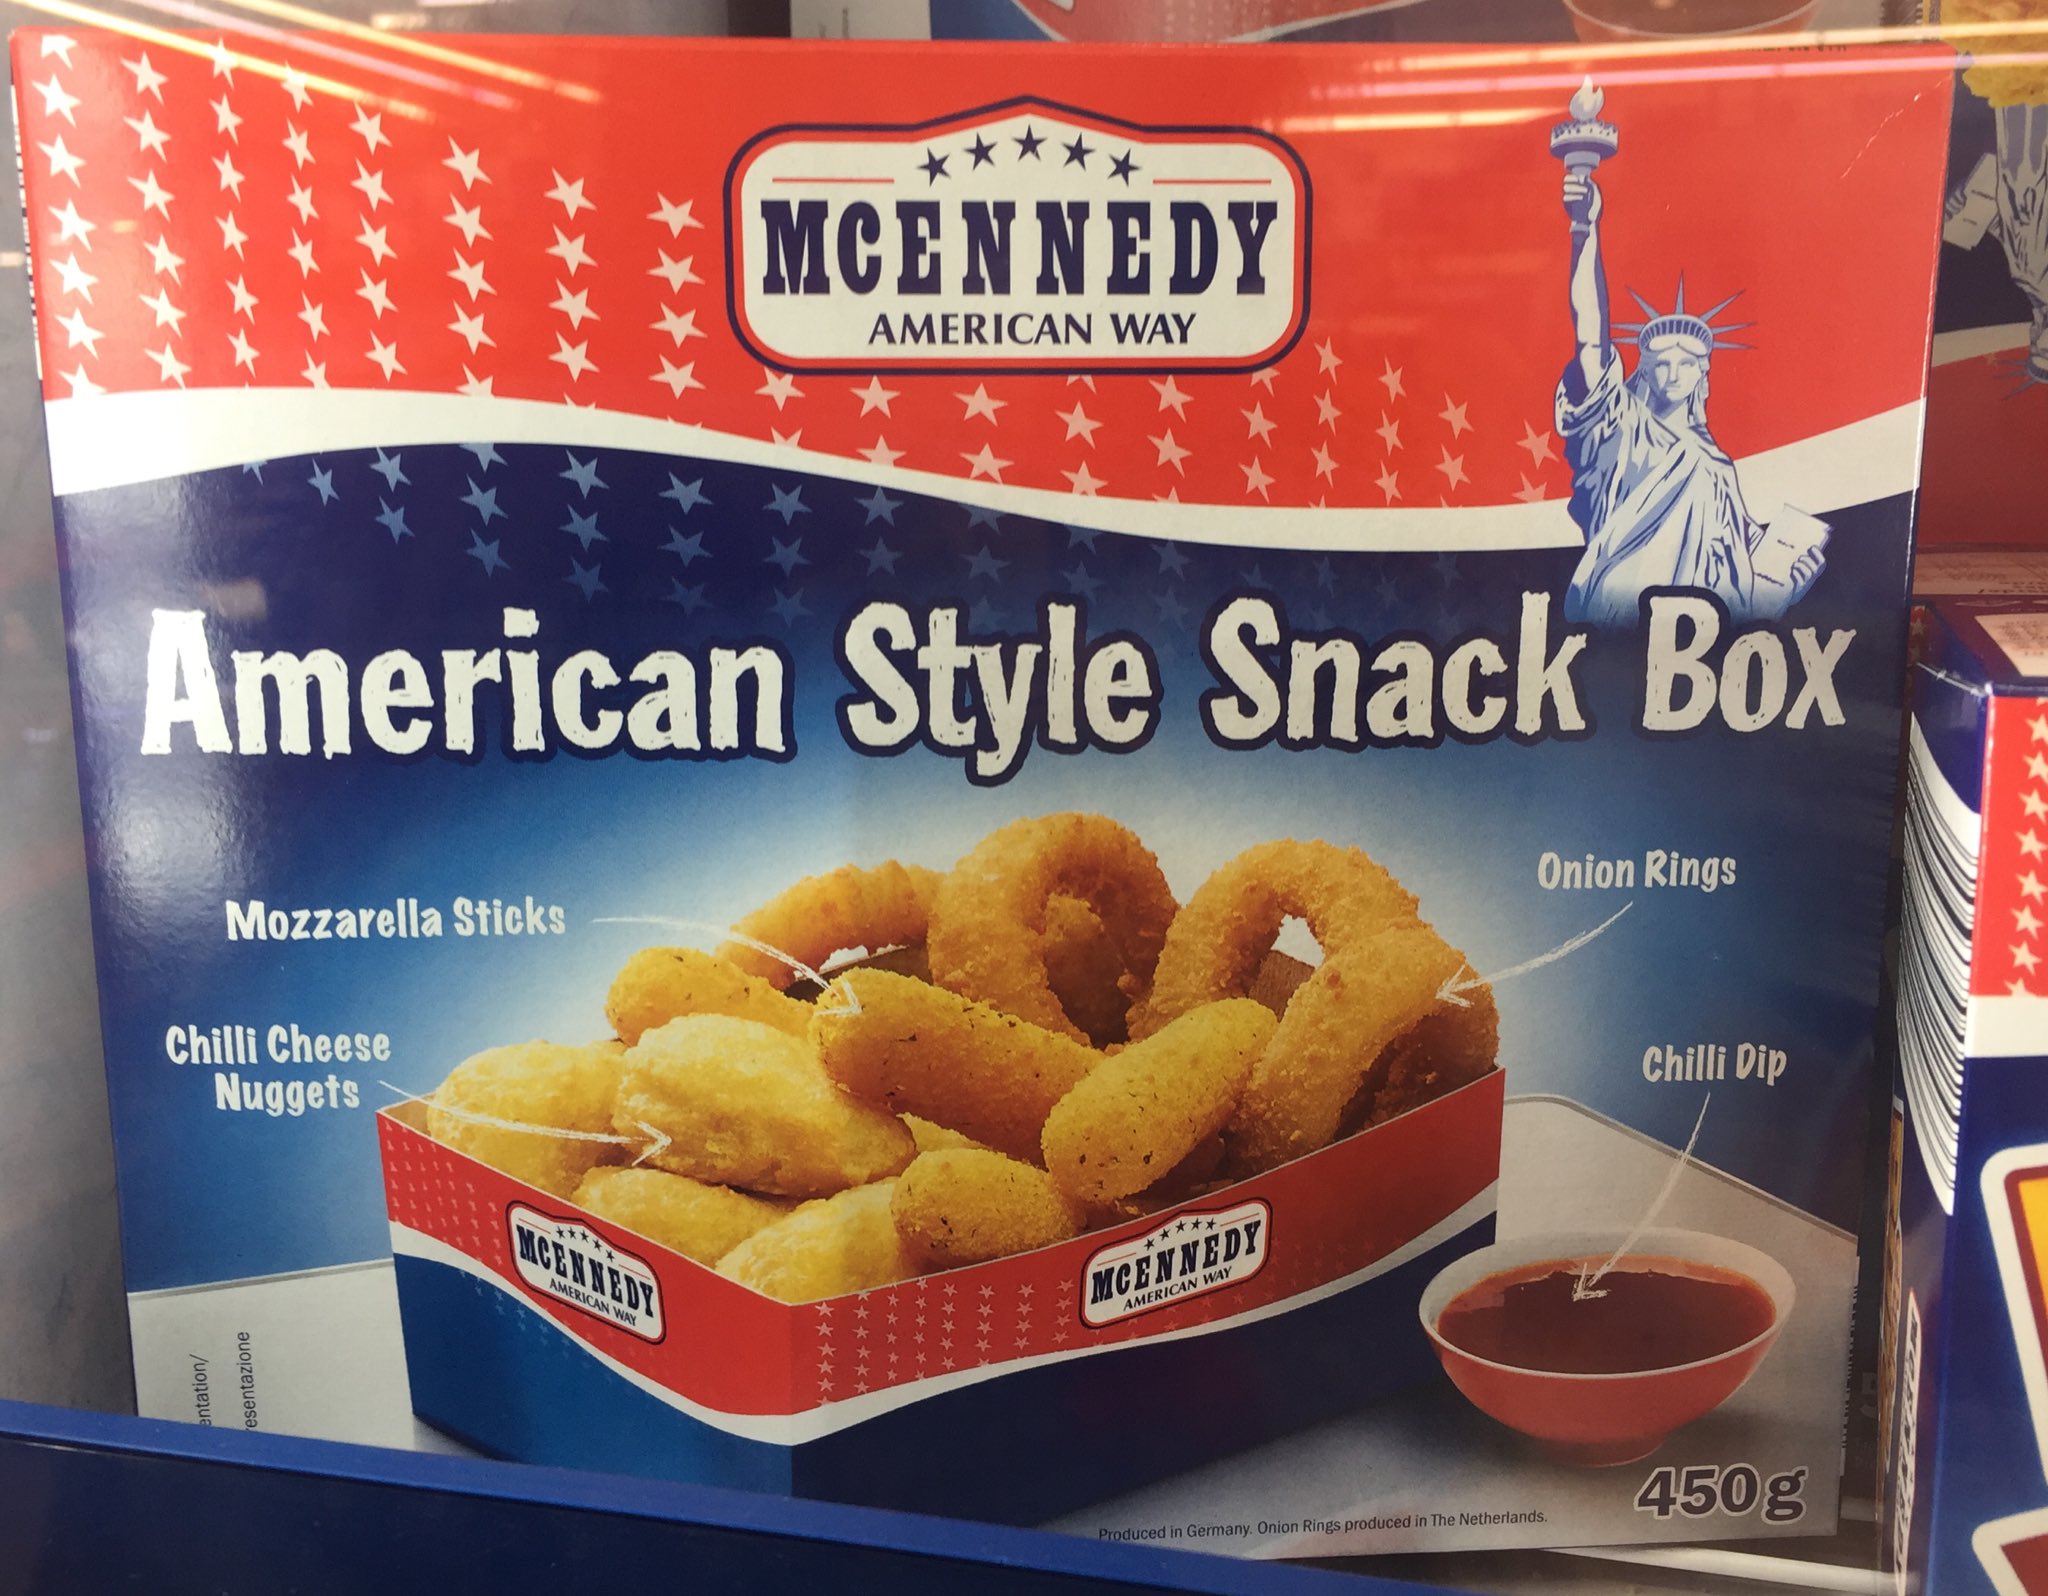 Rijd weg Great Barrier Reef hotel Denise at Mousesteps on Twitter: "Lidl grocery in Belgium has a frozen  snack box you can buy if you want to eat like an American. :) #belgium  https://t.co/F3tdKazmf1" / Twitter